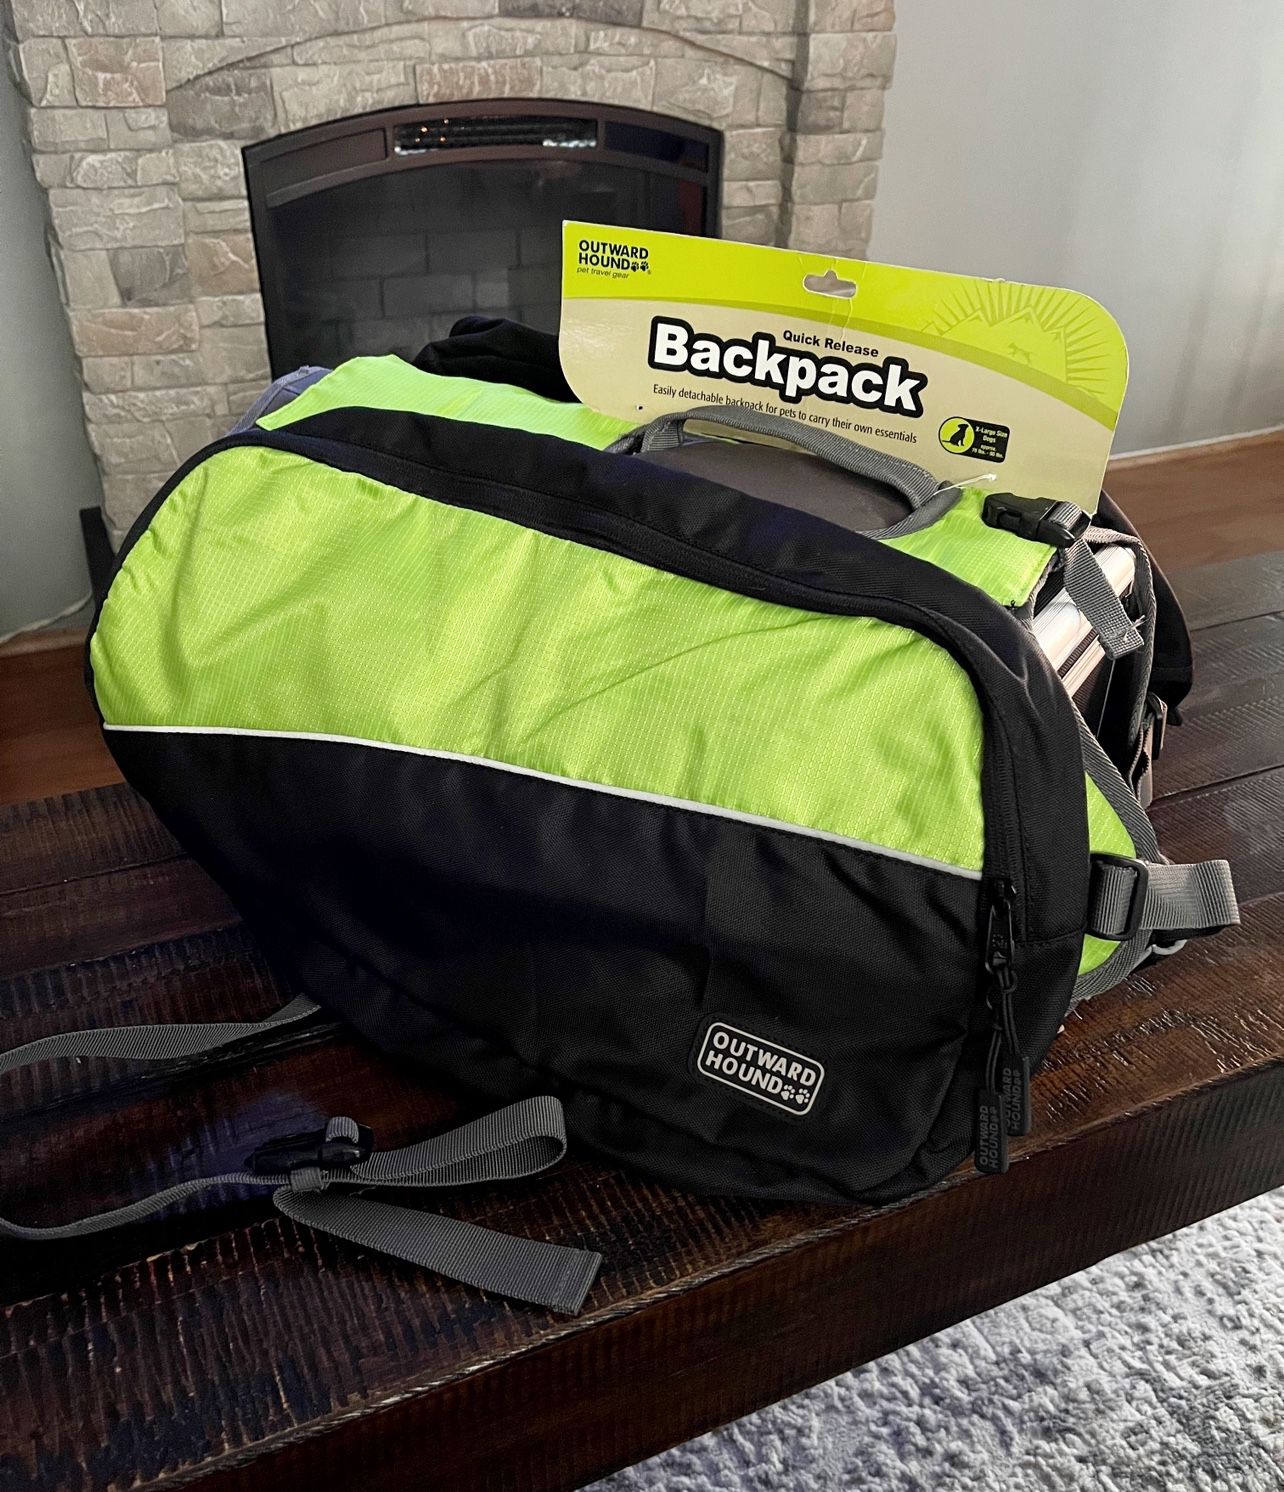 New! Dogs Outward Hound XL Quick Release Backpack. Retail $40. Size XL: 25-41" 70-90lbs. Brand new never used! Removable pack takes weight off the dog